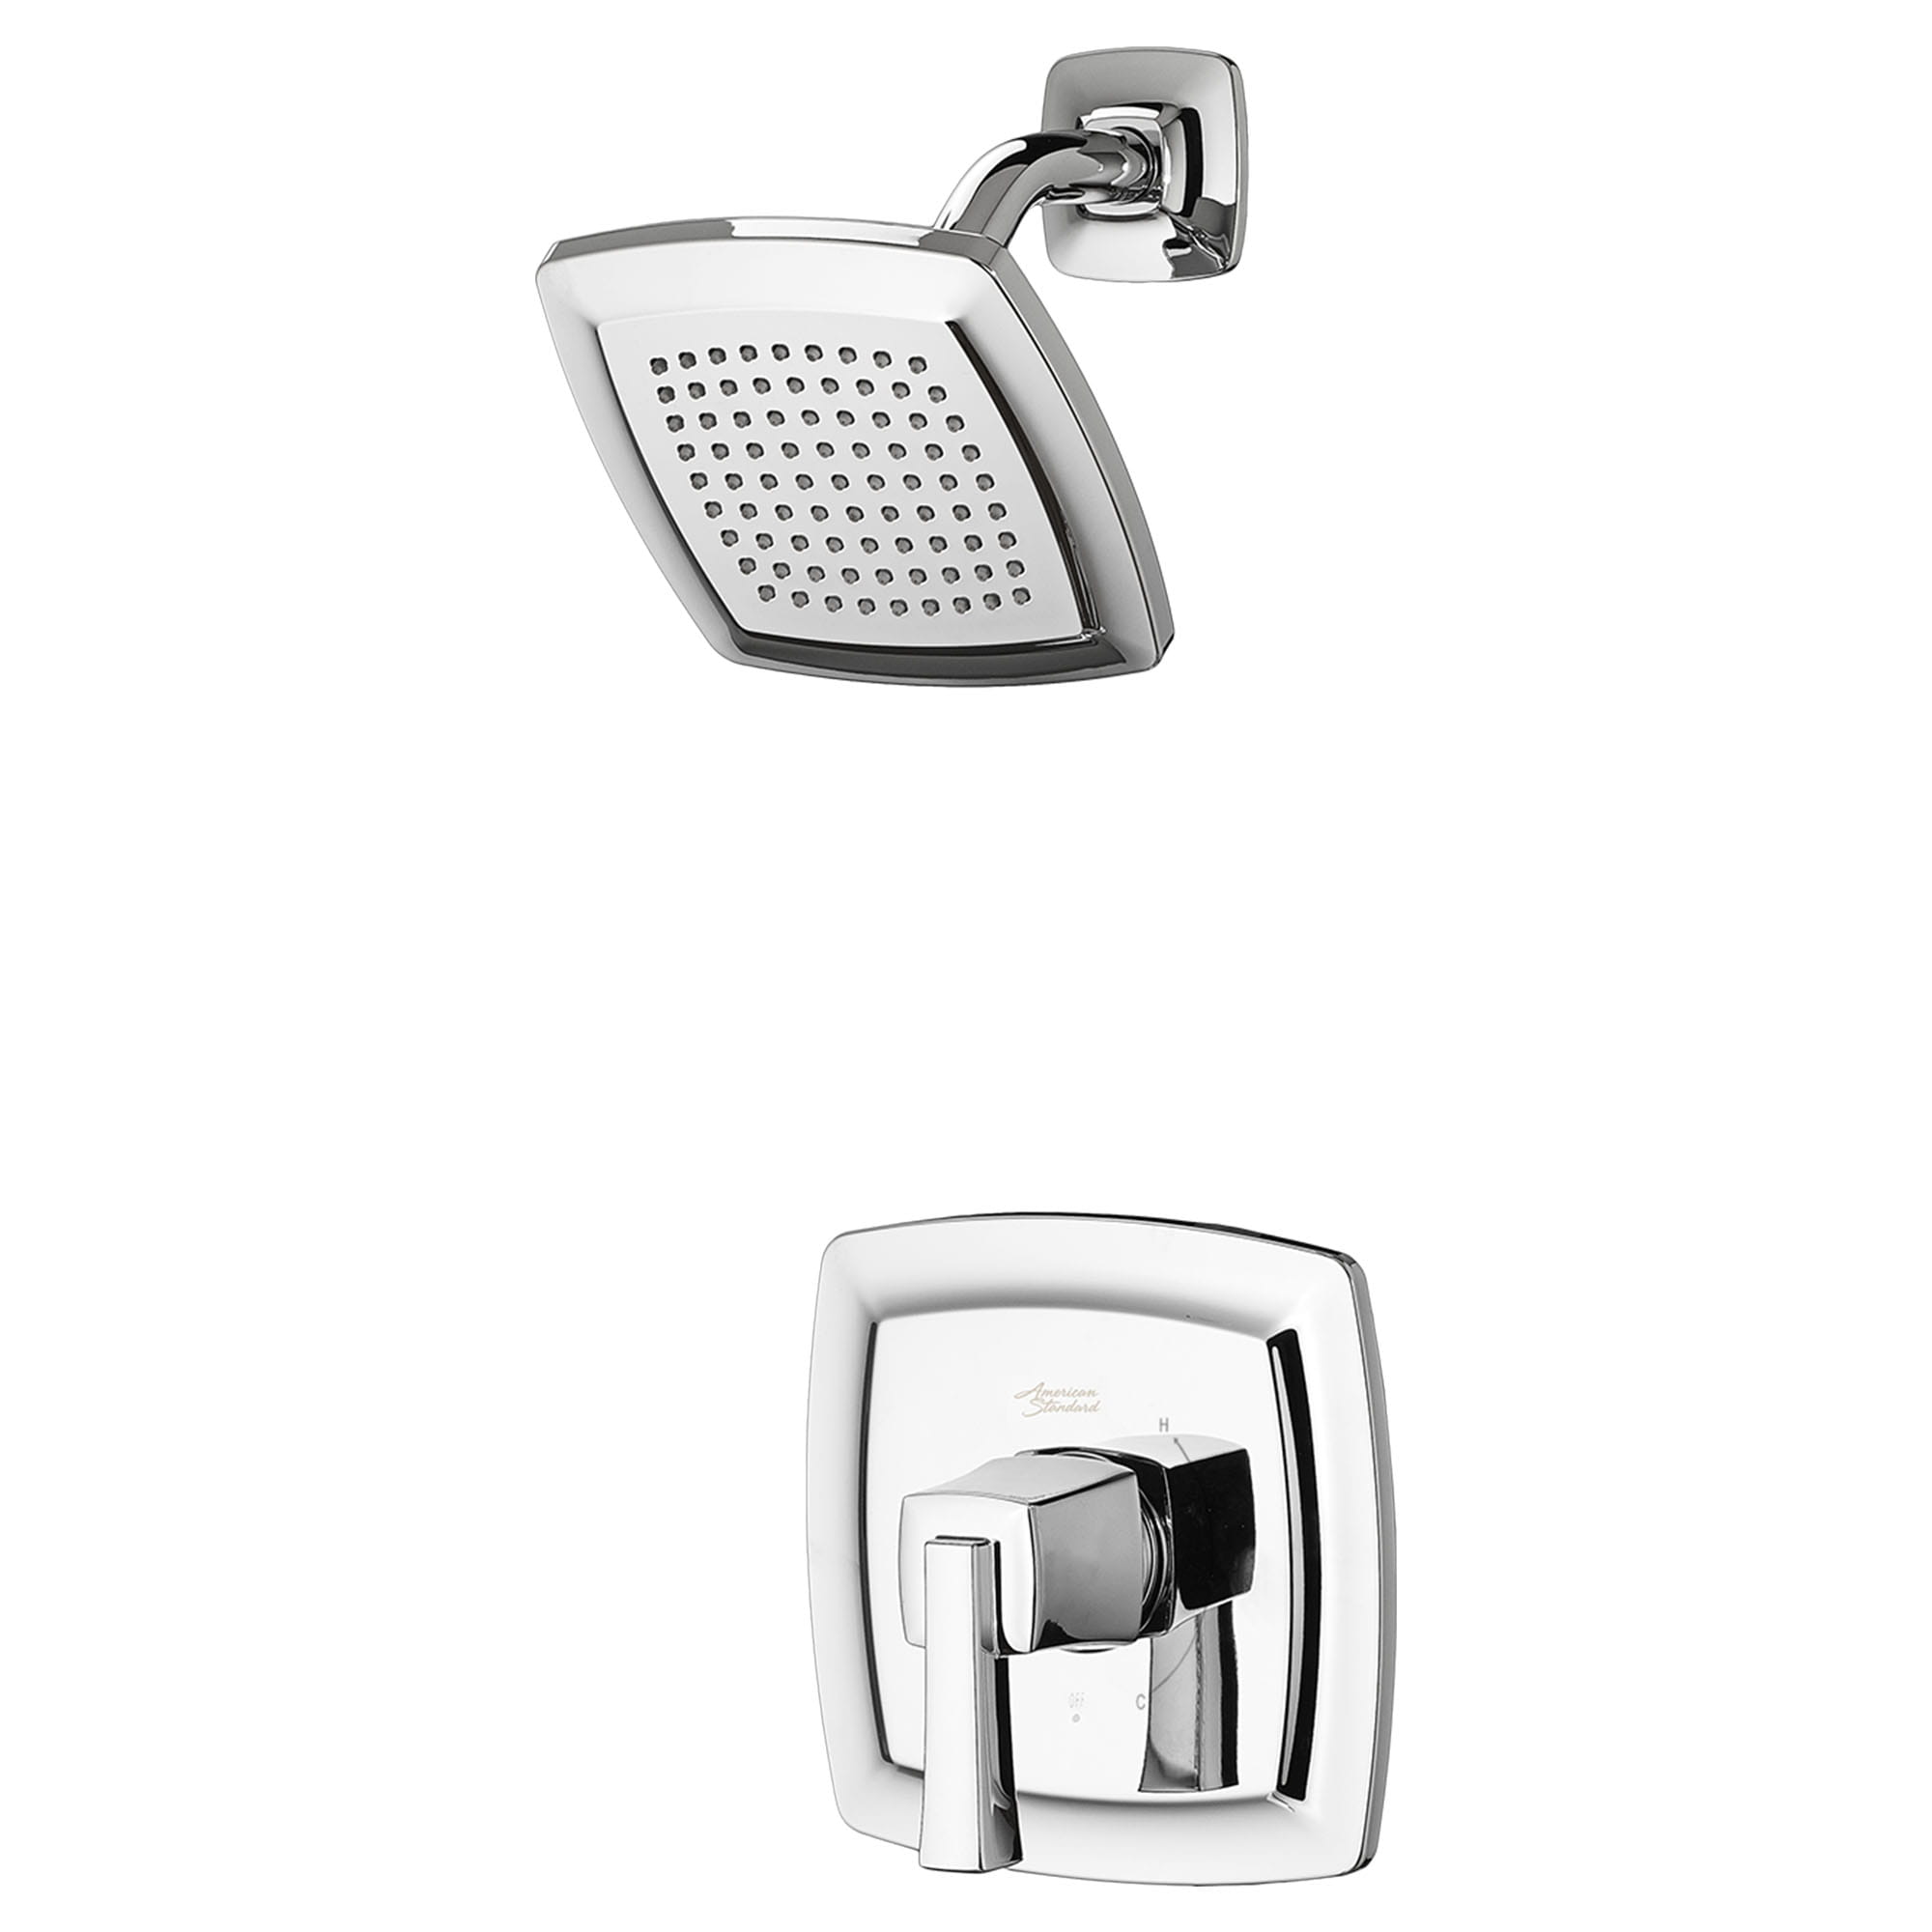 Townsend 175 gpm 66 L min Shower Trim Kit With Water Saving Showerhead Double Ceramic Pressure Balance Cartridge With Lever Handle CHROME